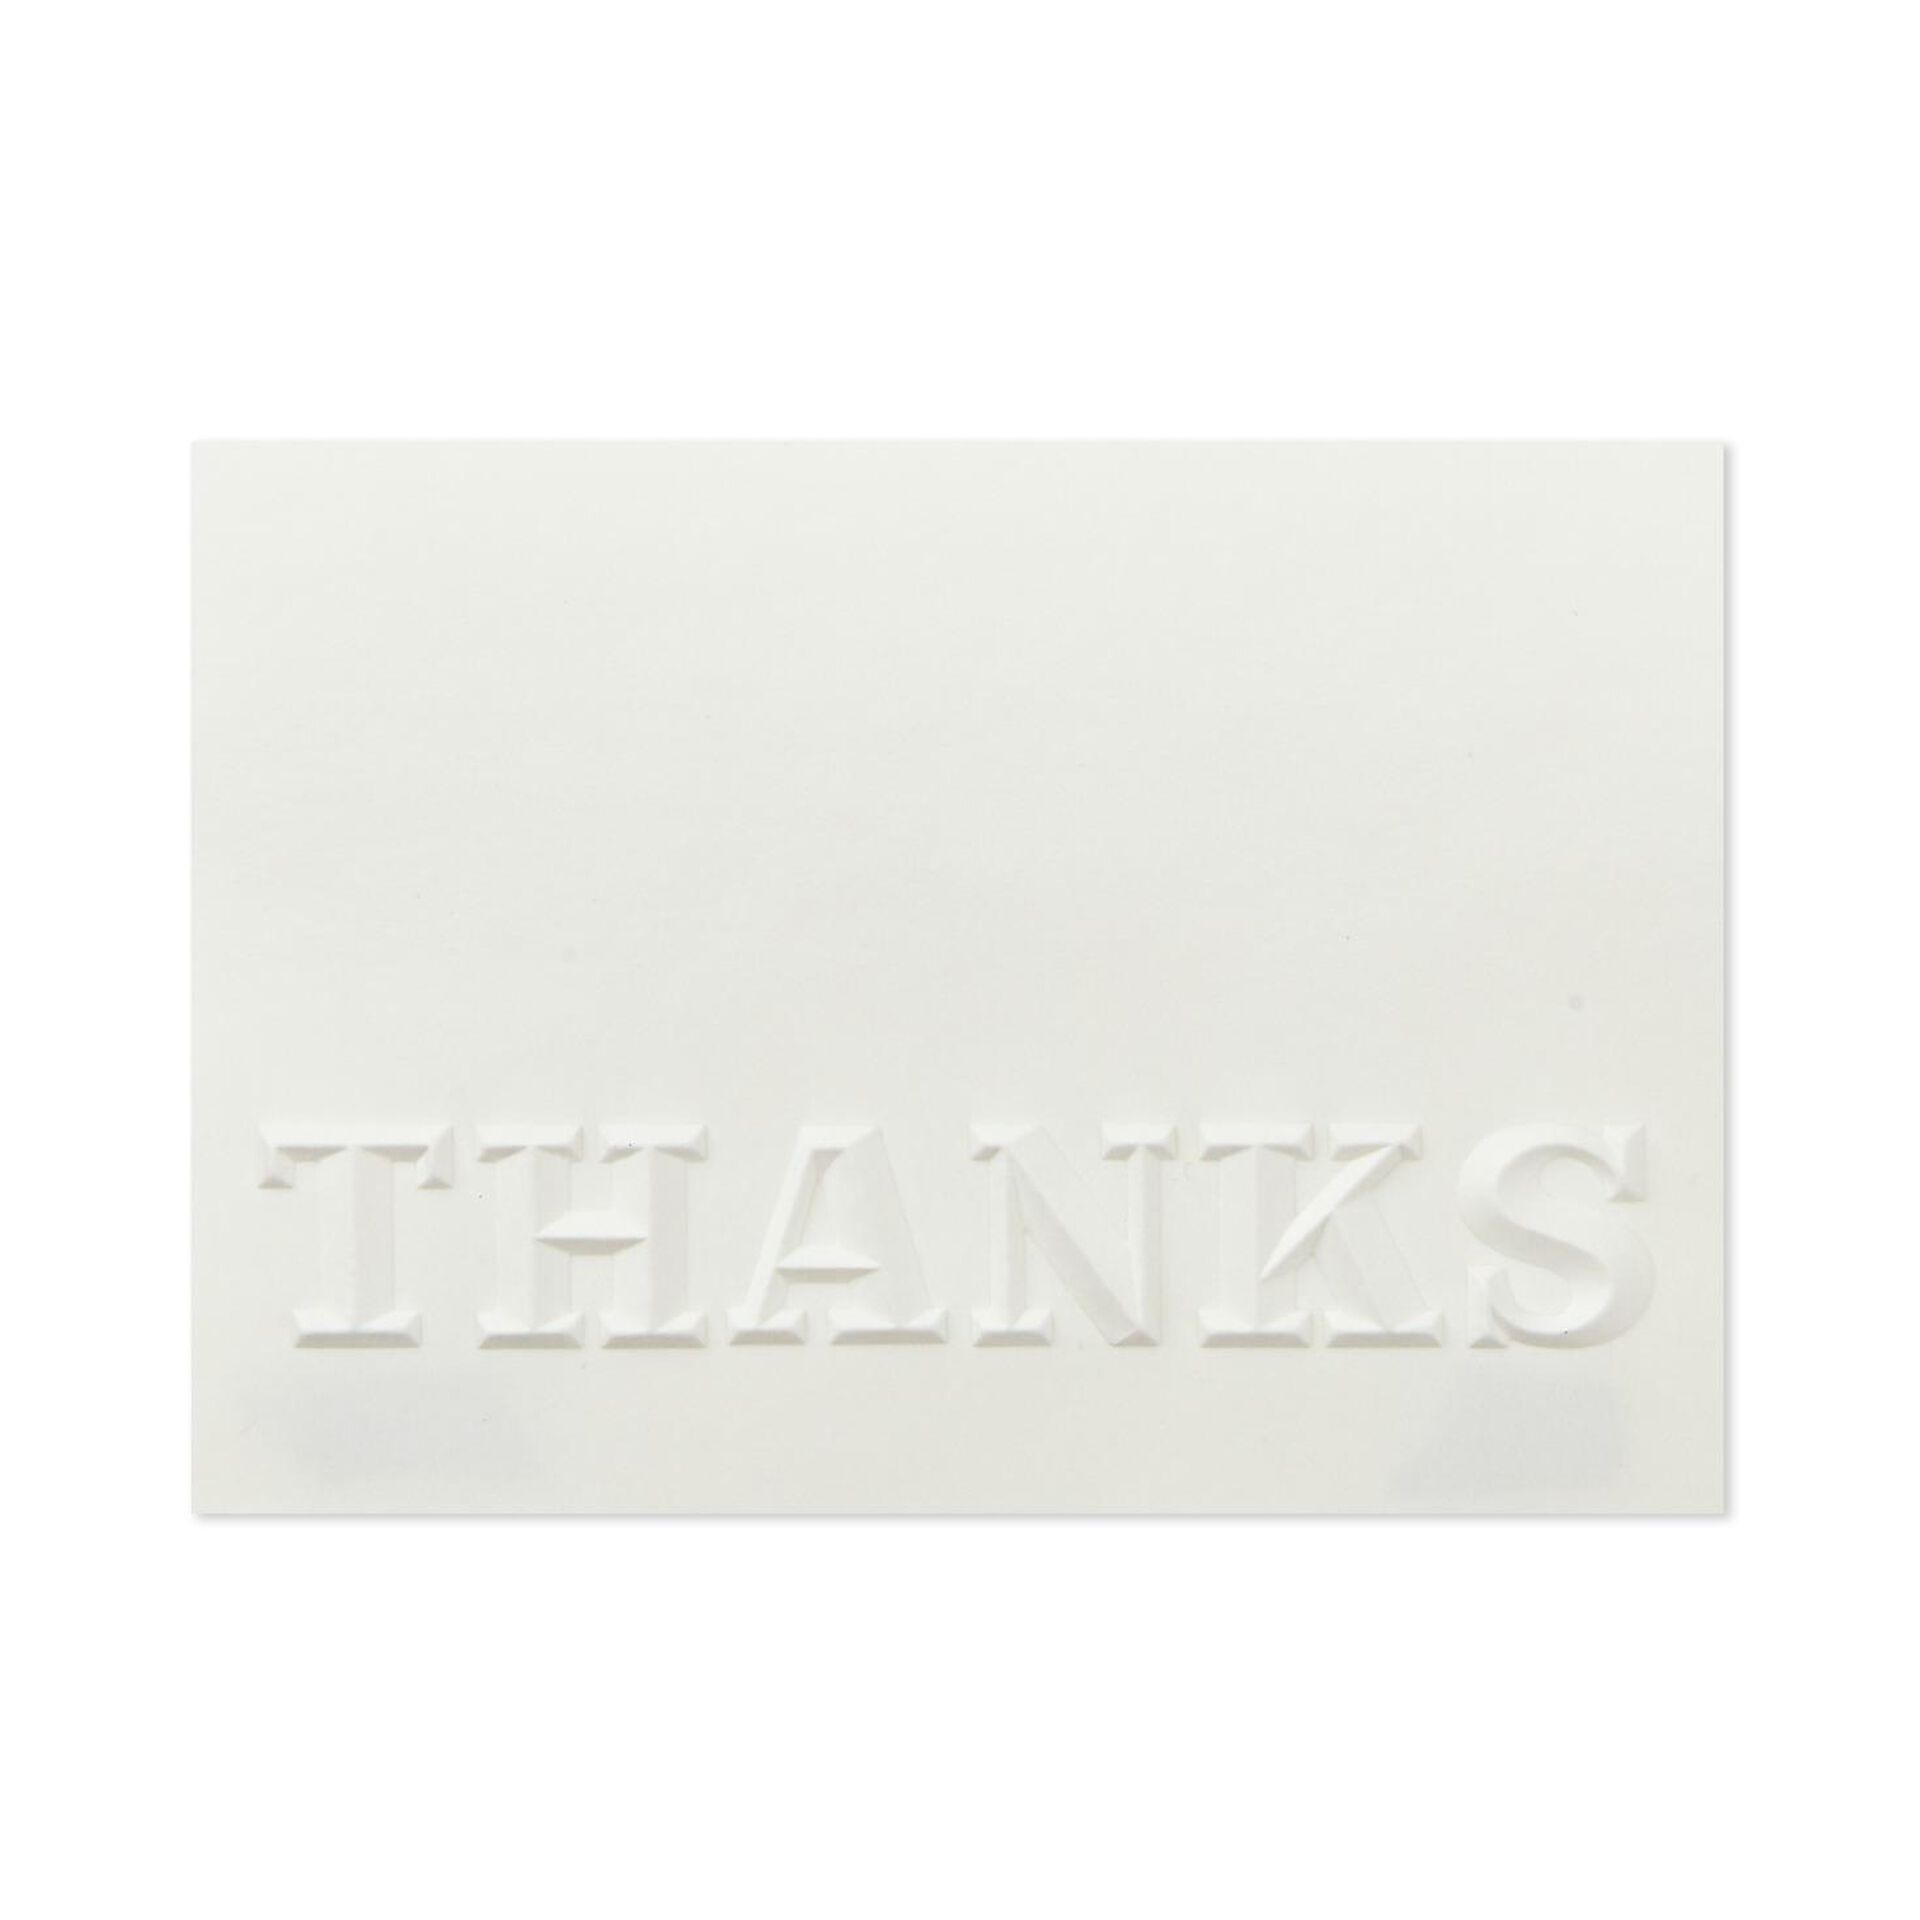 Embossed-Cream-Blank-Thank-You-Notes-Box-of-8-root-1499THK4116_THK4116_02.jpg_Source_Image